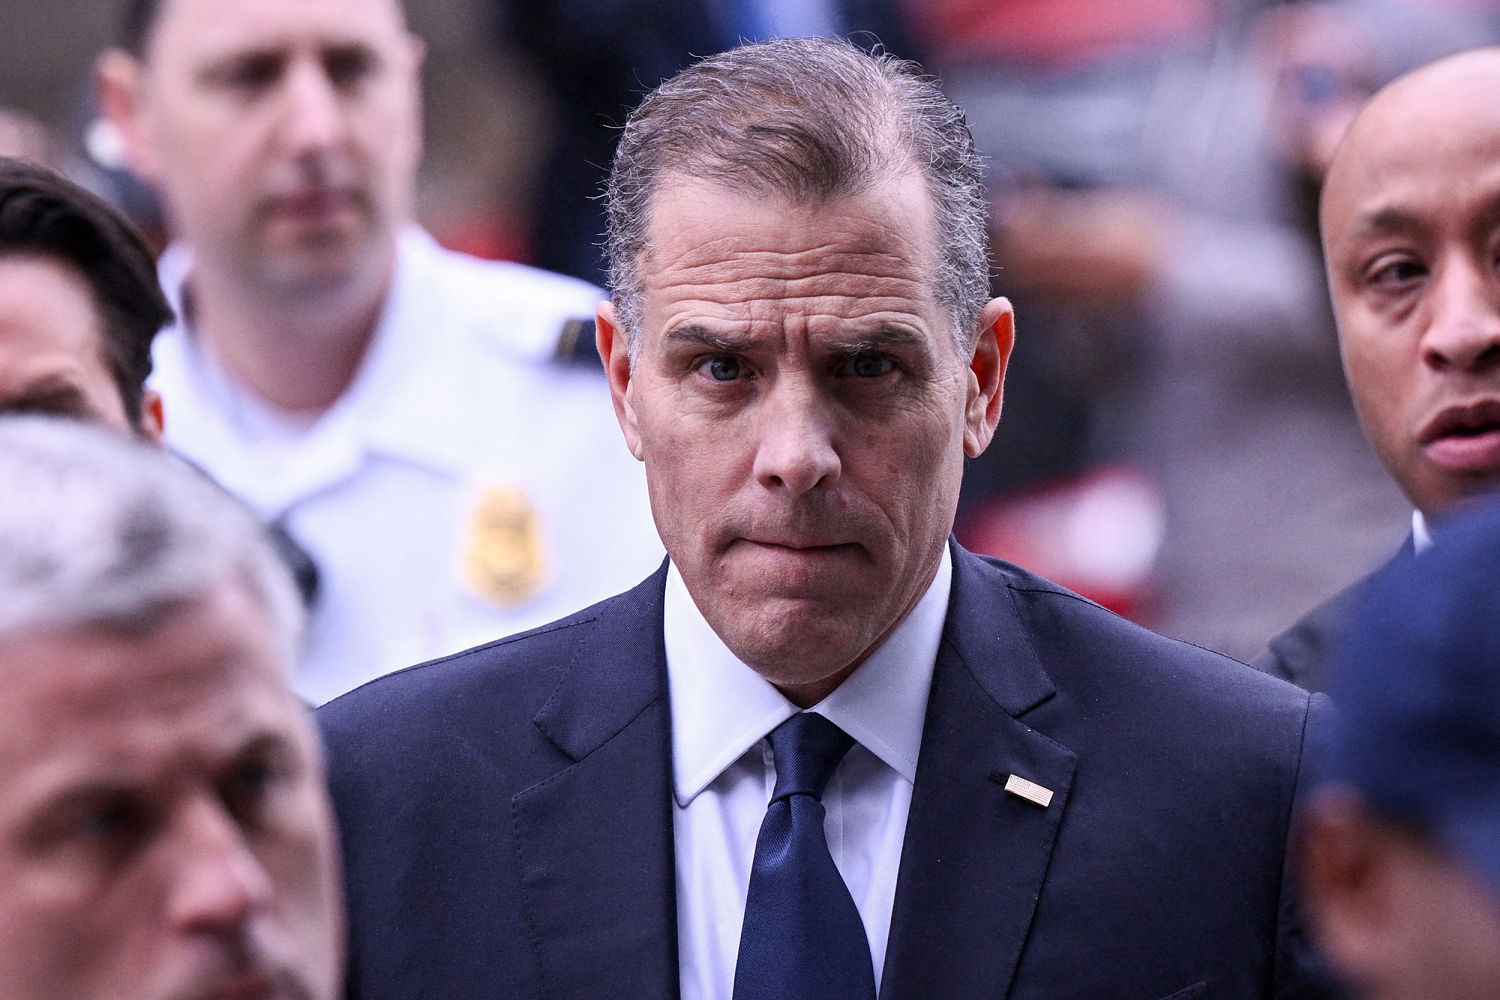 Hunter Biden’s high-stakes accountability reveals a larger truth